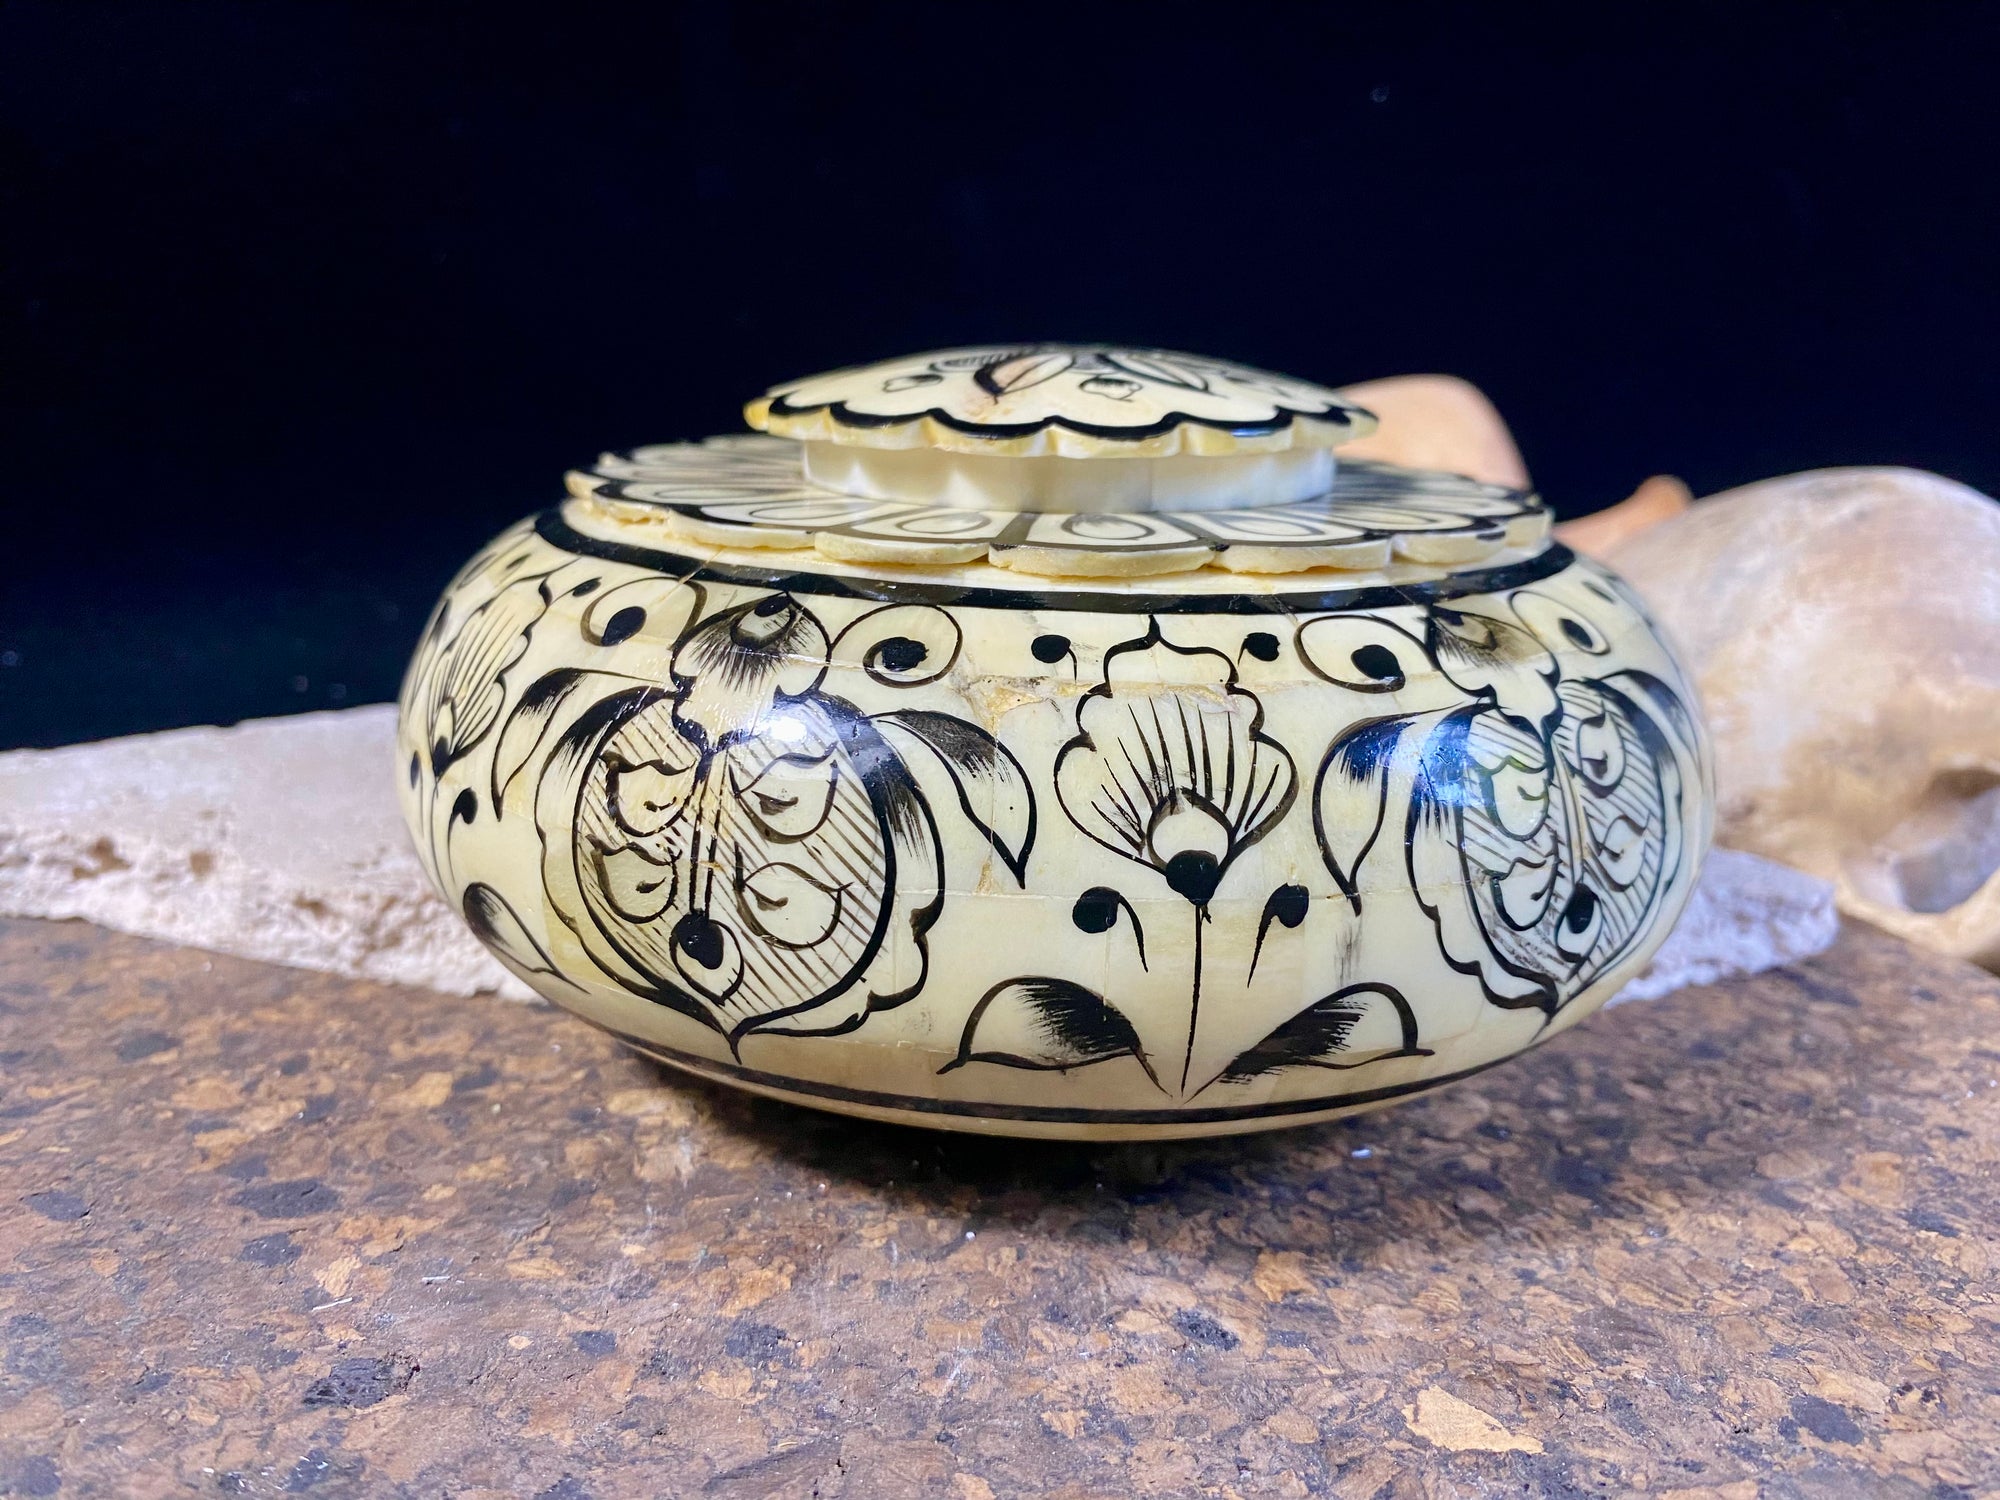 A beautiful low oval lidded bowl or box, traditionally called an opium pot because of its shape. Crafted from hand shaped panels of camel bone over wood, then hand painted. Hand made in Rajasthan, India. Measurements: diameter 15.5 cm, height 6.5 cm. 